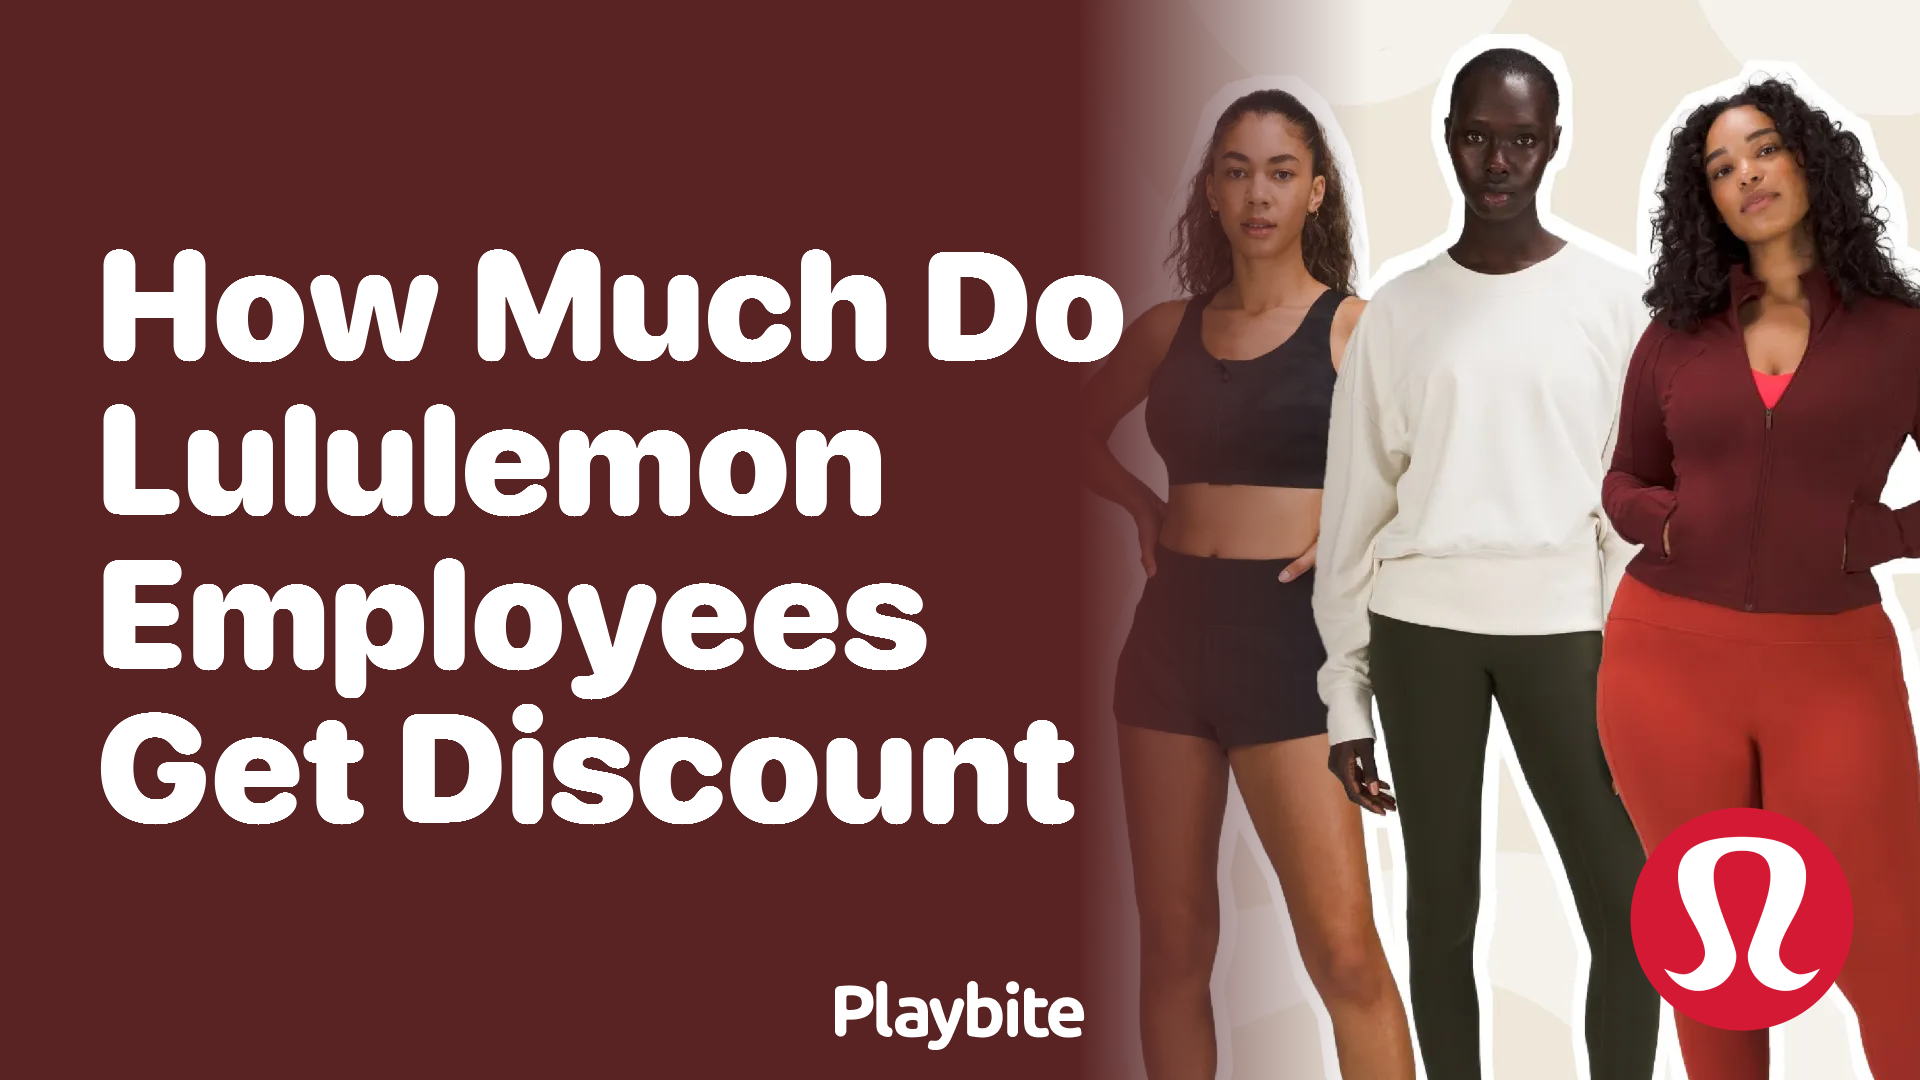 How Much Discount Do Lululemon Employees Get? - Playbite